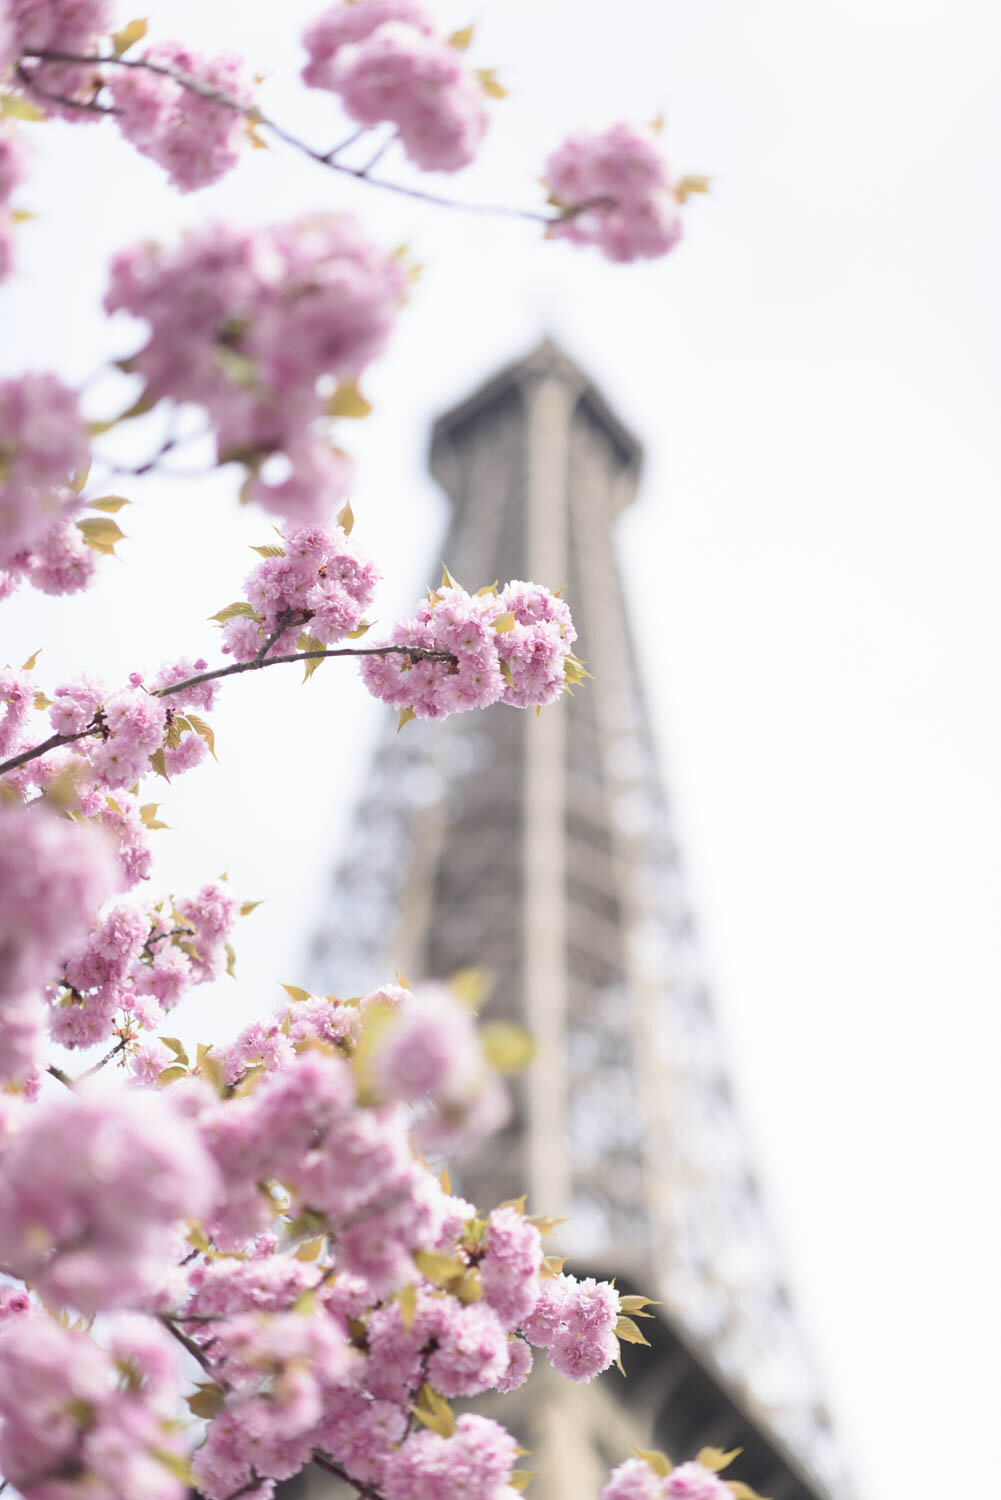 The Eiffel Tower and Cherry Blossoms